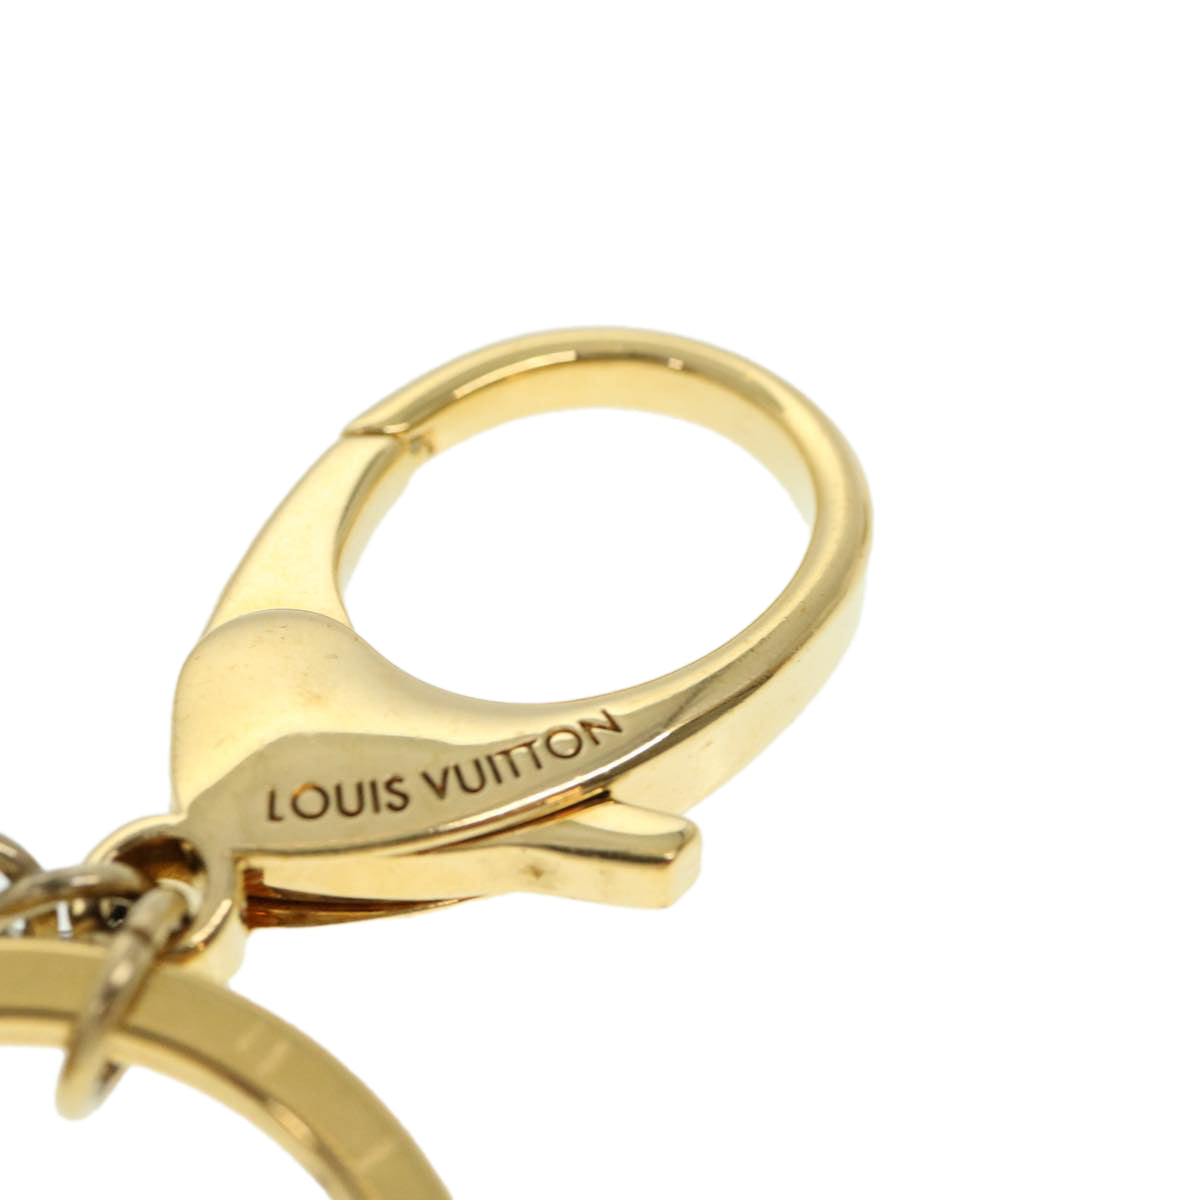 LOUIS VUITTON Porte Cles looping Key Holder Gold Pink M66006 LV Auth am4003